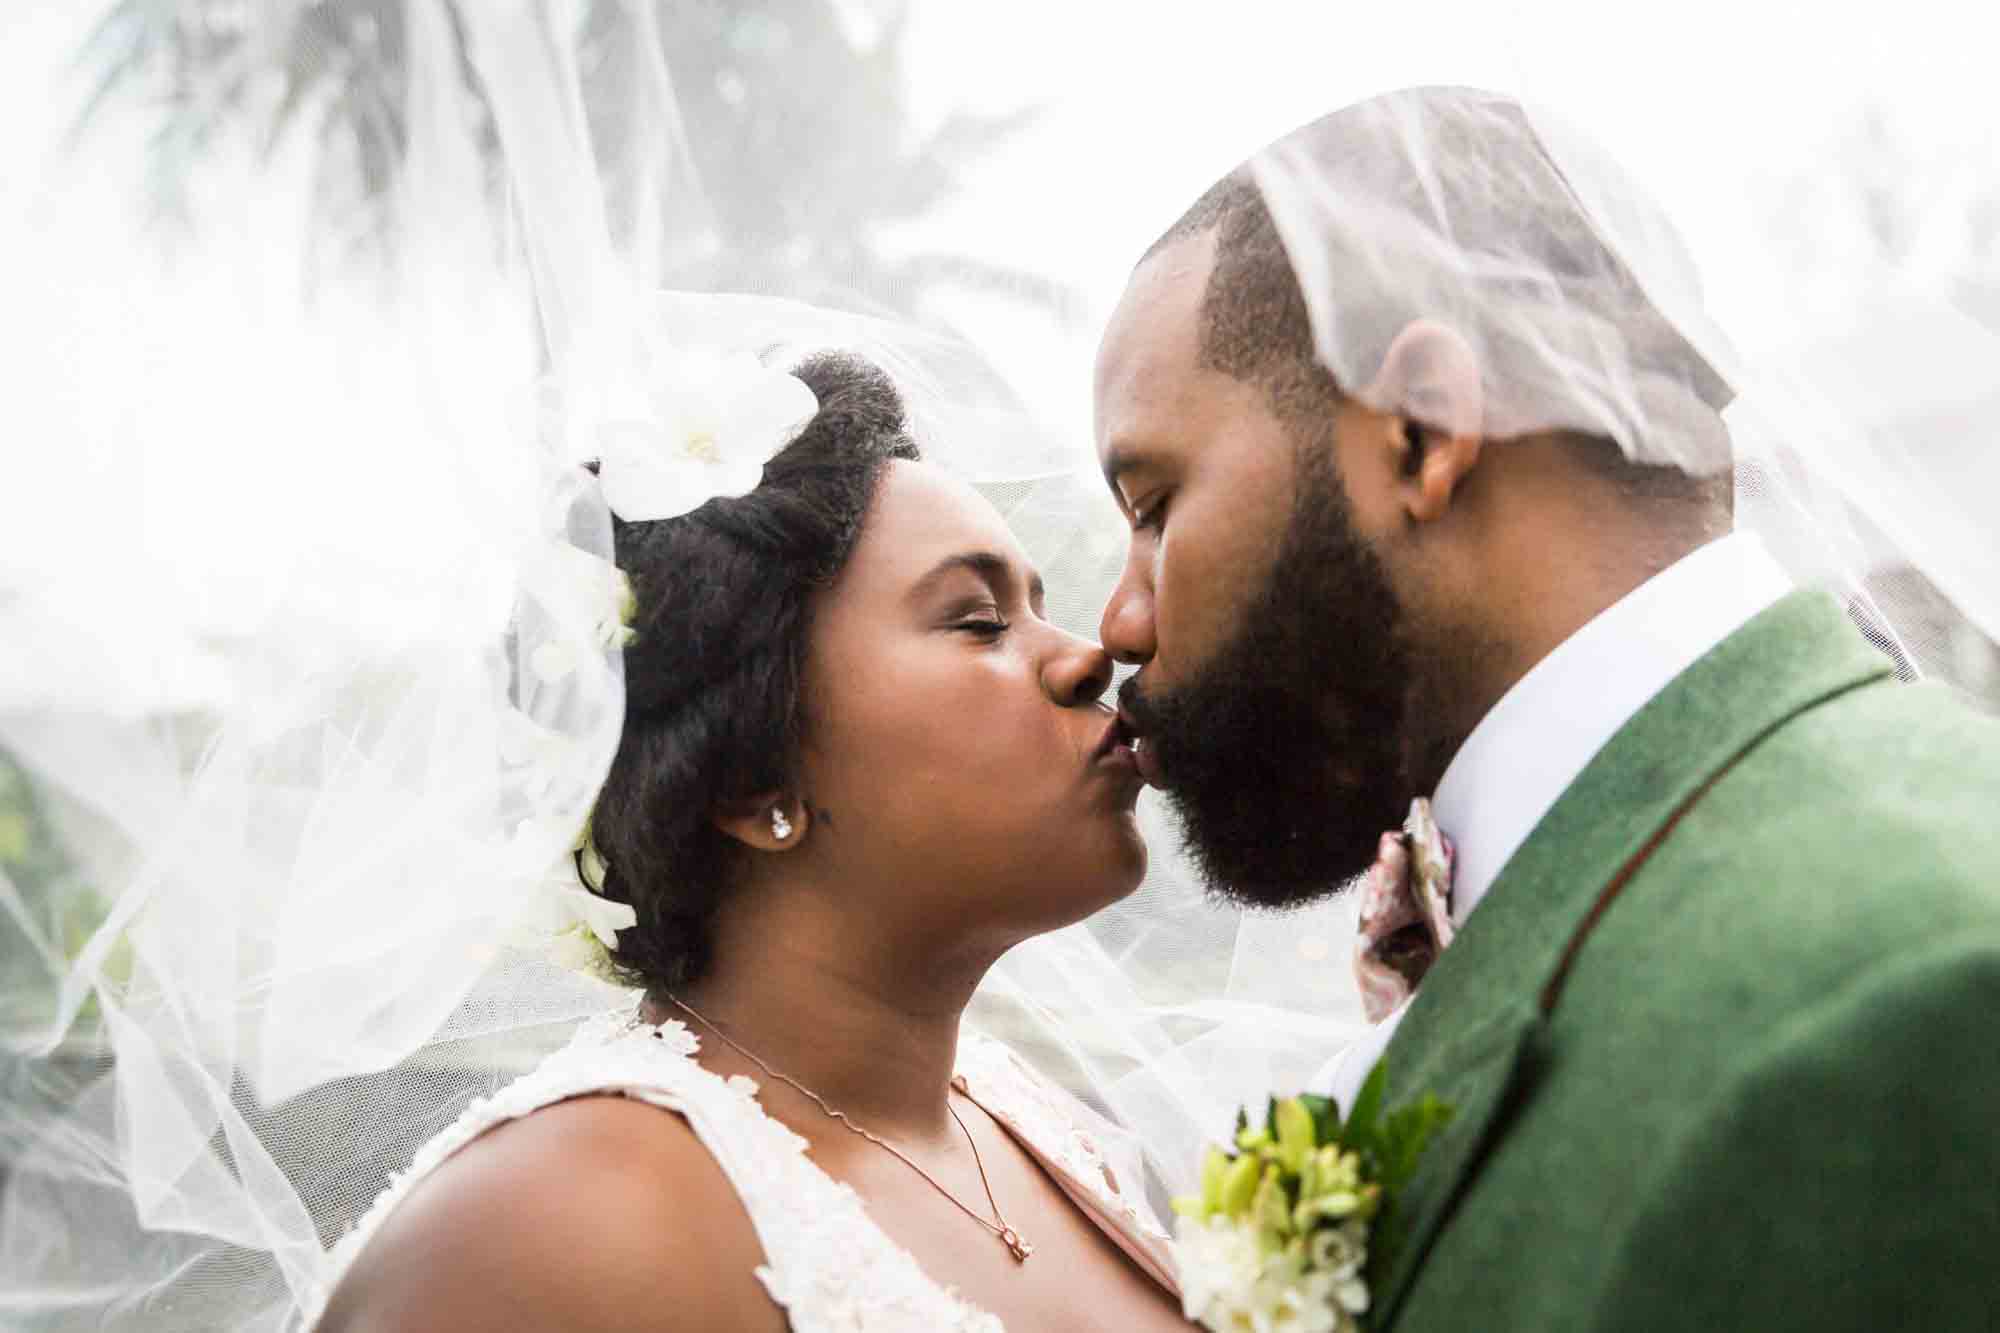 Bride and groom kissing under veil for an article on destination wedding planning tips